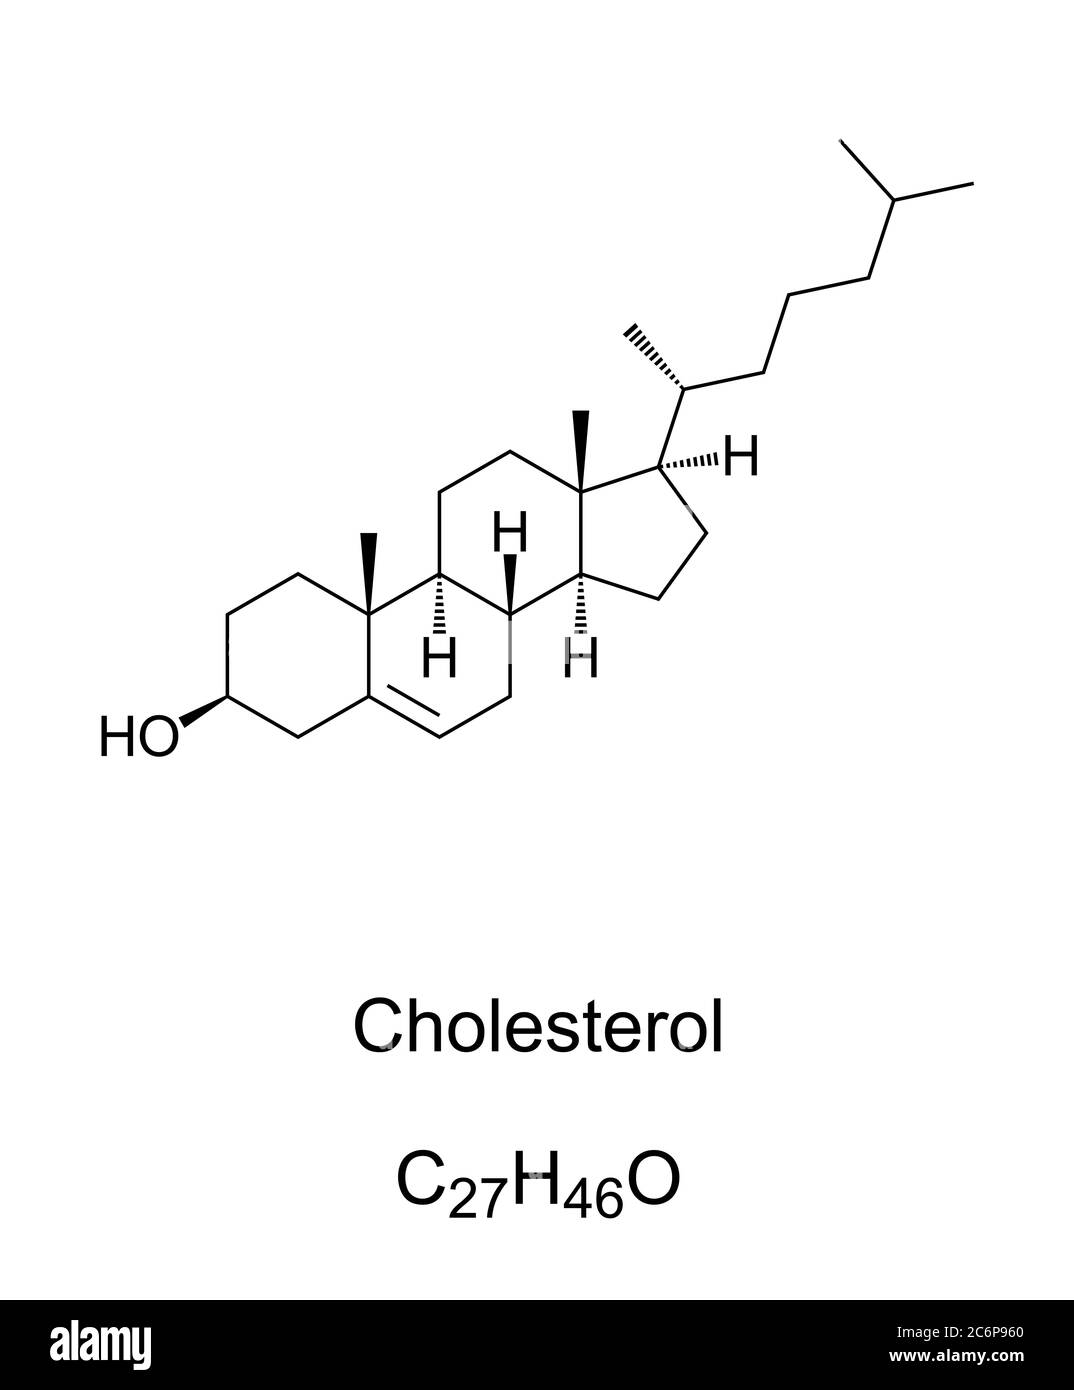 Cholesterol, chemical structure and formula. A modified steroid, a type of lipid and the principal sterol synthesized by humans and animals. Stock Photo